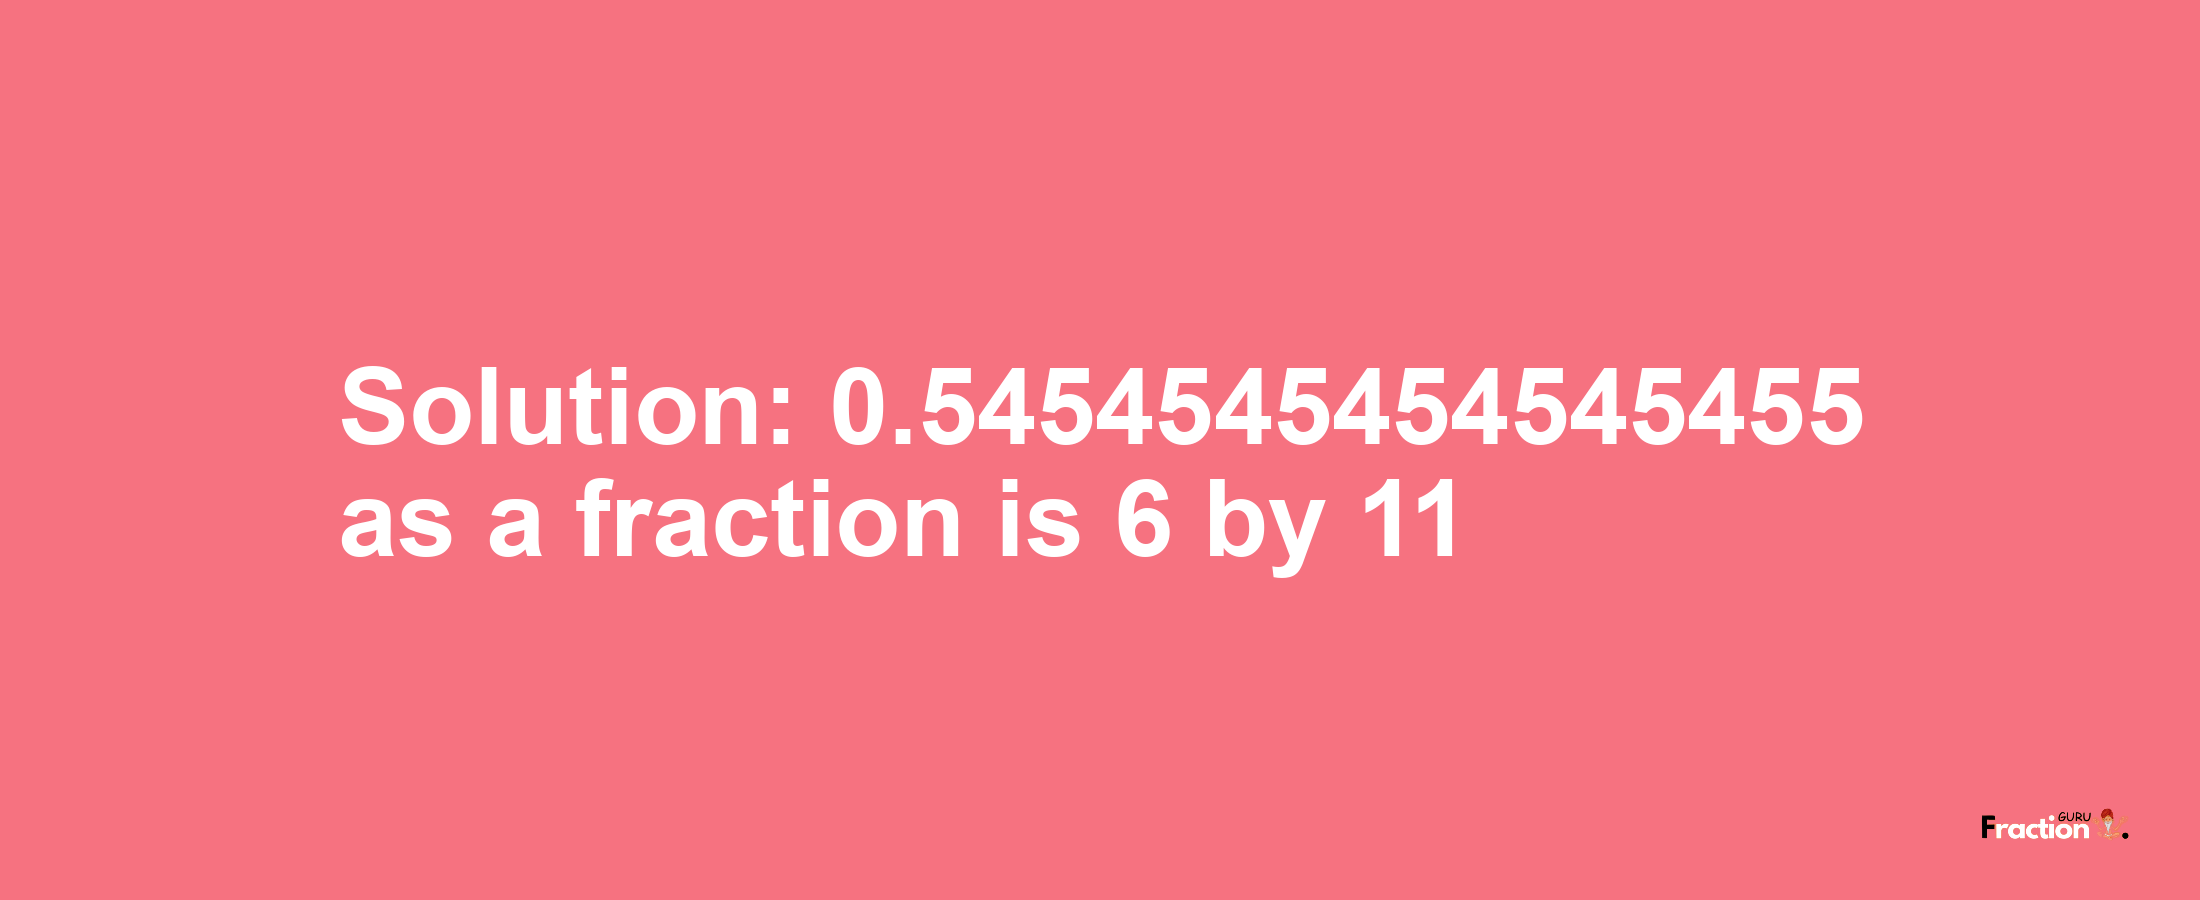 Solution:0.5454545454545455 as a fraction is 6/11